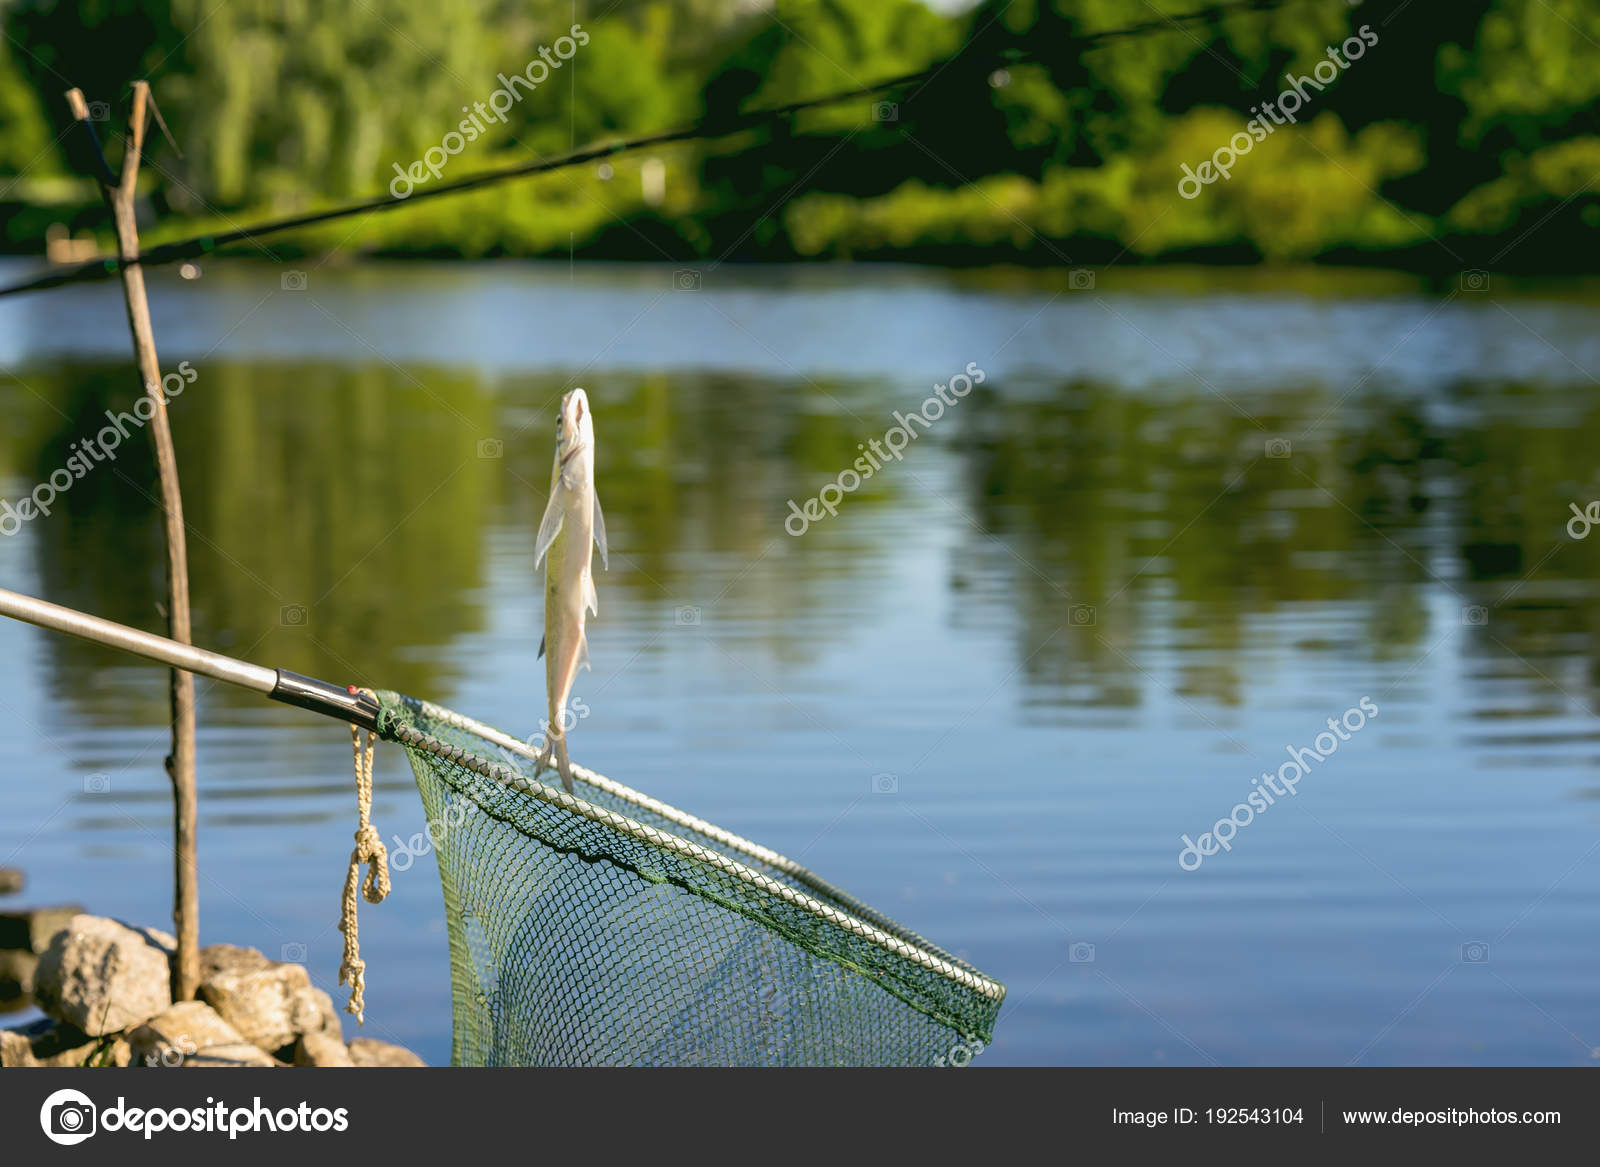 Freshwater fish just taken from water on fishing line over at landing net  against natural landscape, outdoor water. Concept active rest, hobbies,  countryside relaks Stock Photo by ©SvetlanaIs 192543104